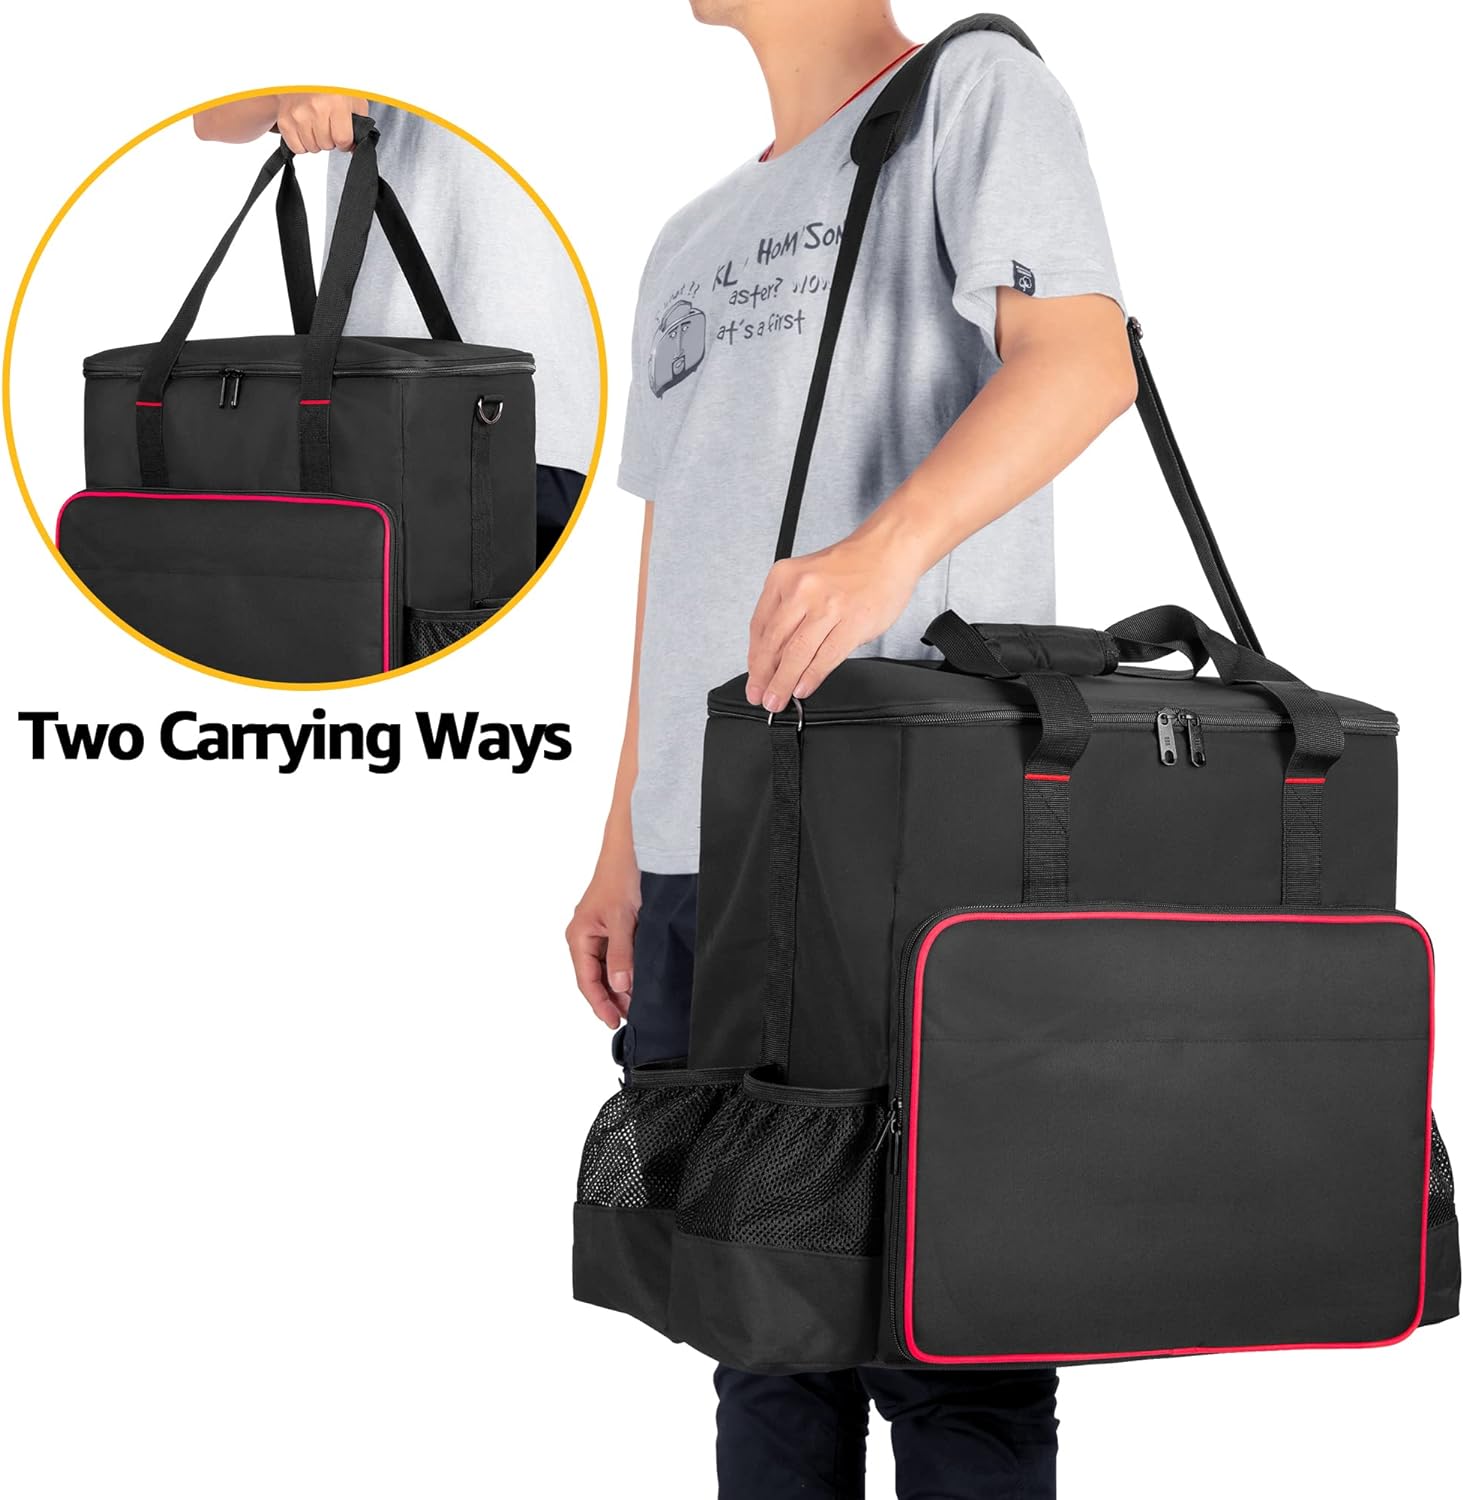 samdew Big Heater Carry Bag Compatible with Mr. Heater Big Buddy Propane Heater, Portable Heater Carrying Case Compatible with Mr. Heater MH18B, with Multiple Pockets, Thick Padded  Anti-slip Bottom - Samdew Big Heater Carry Bag Compatible Review